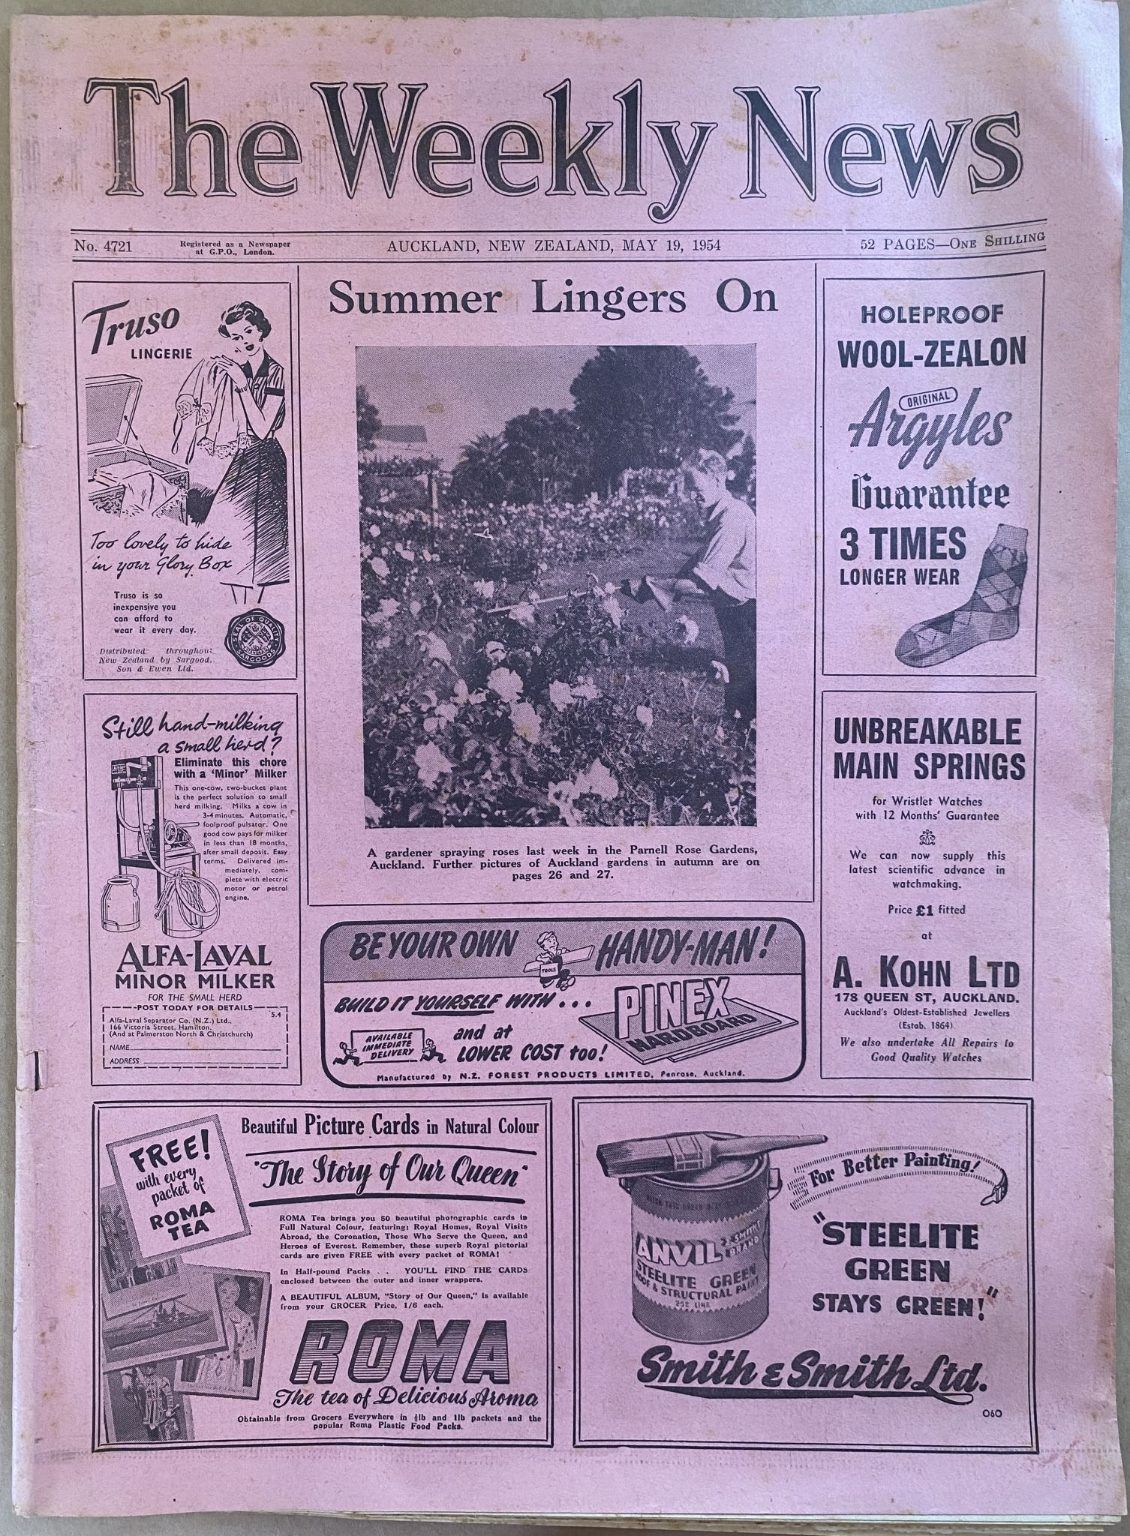 OLD NEWSPAPER: The Weekly News - No. 4721, 19 May 1954